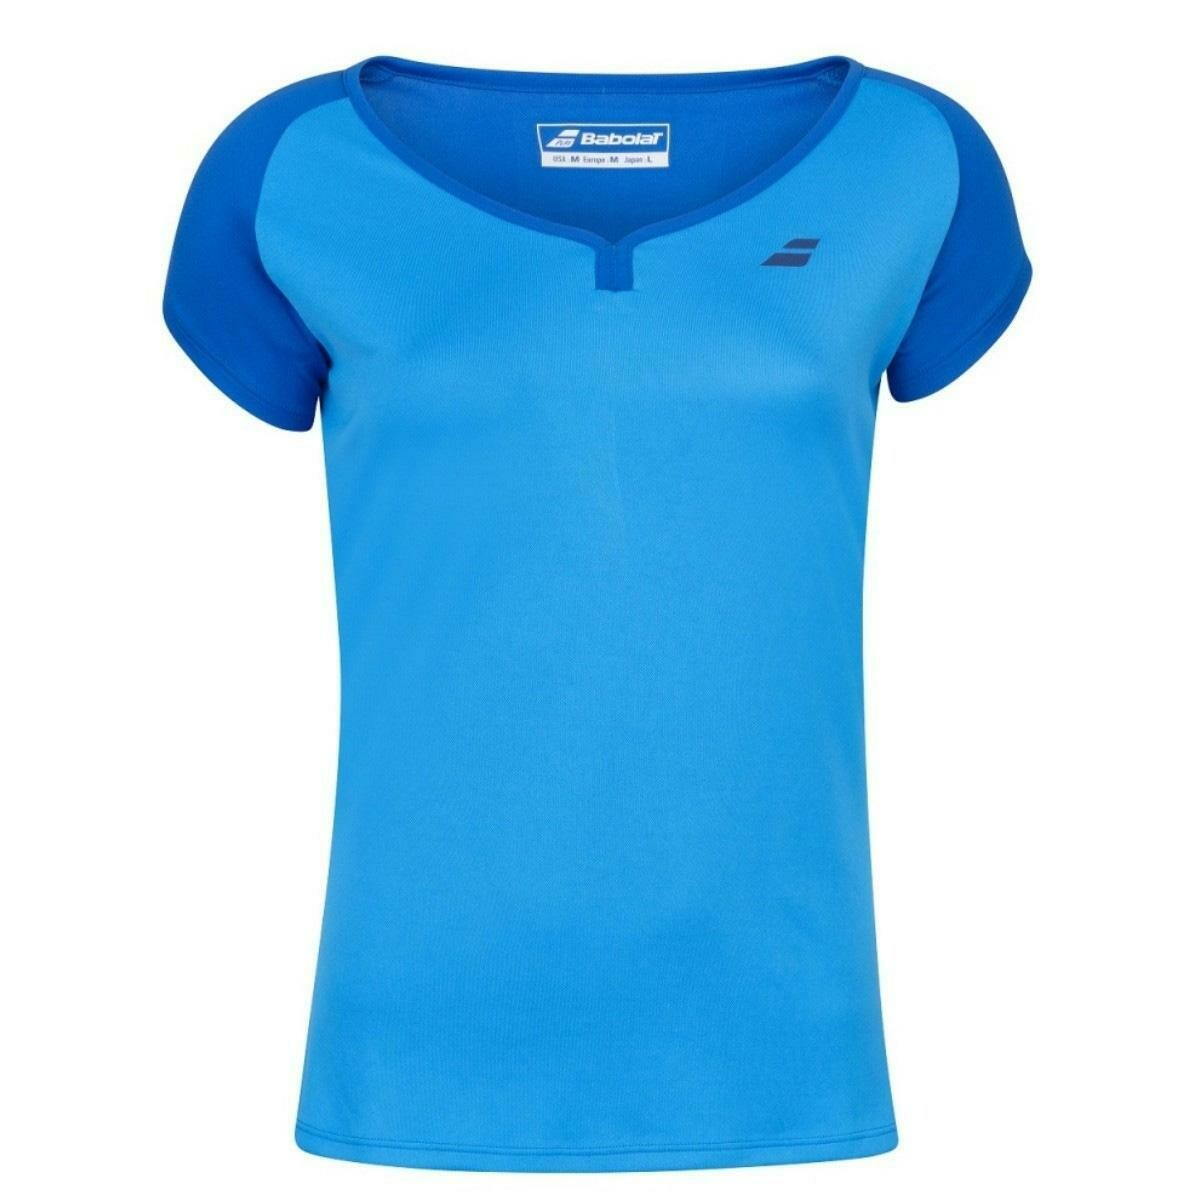 Babolat Womens Play Cap Sleeve Top - Blue Aster